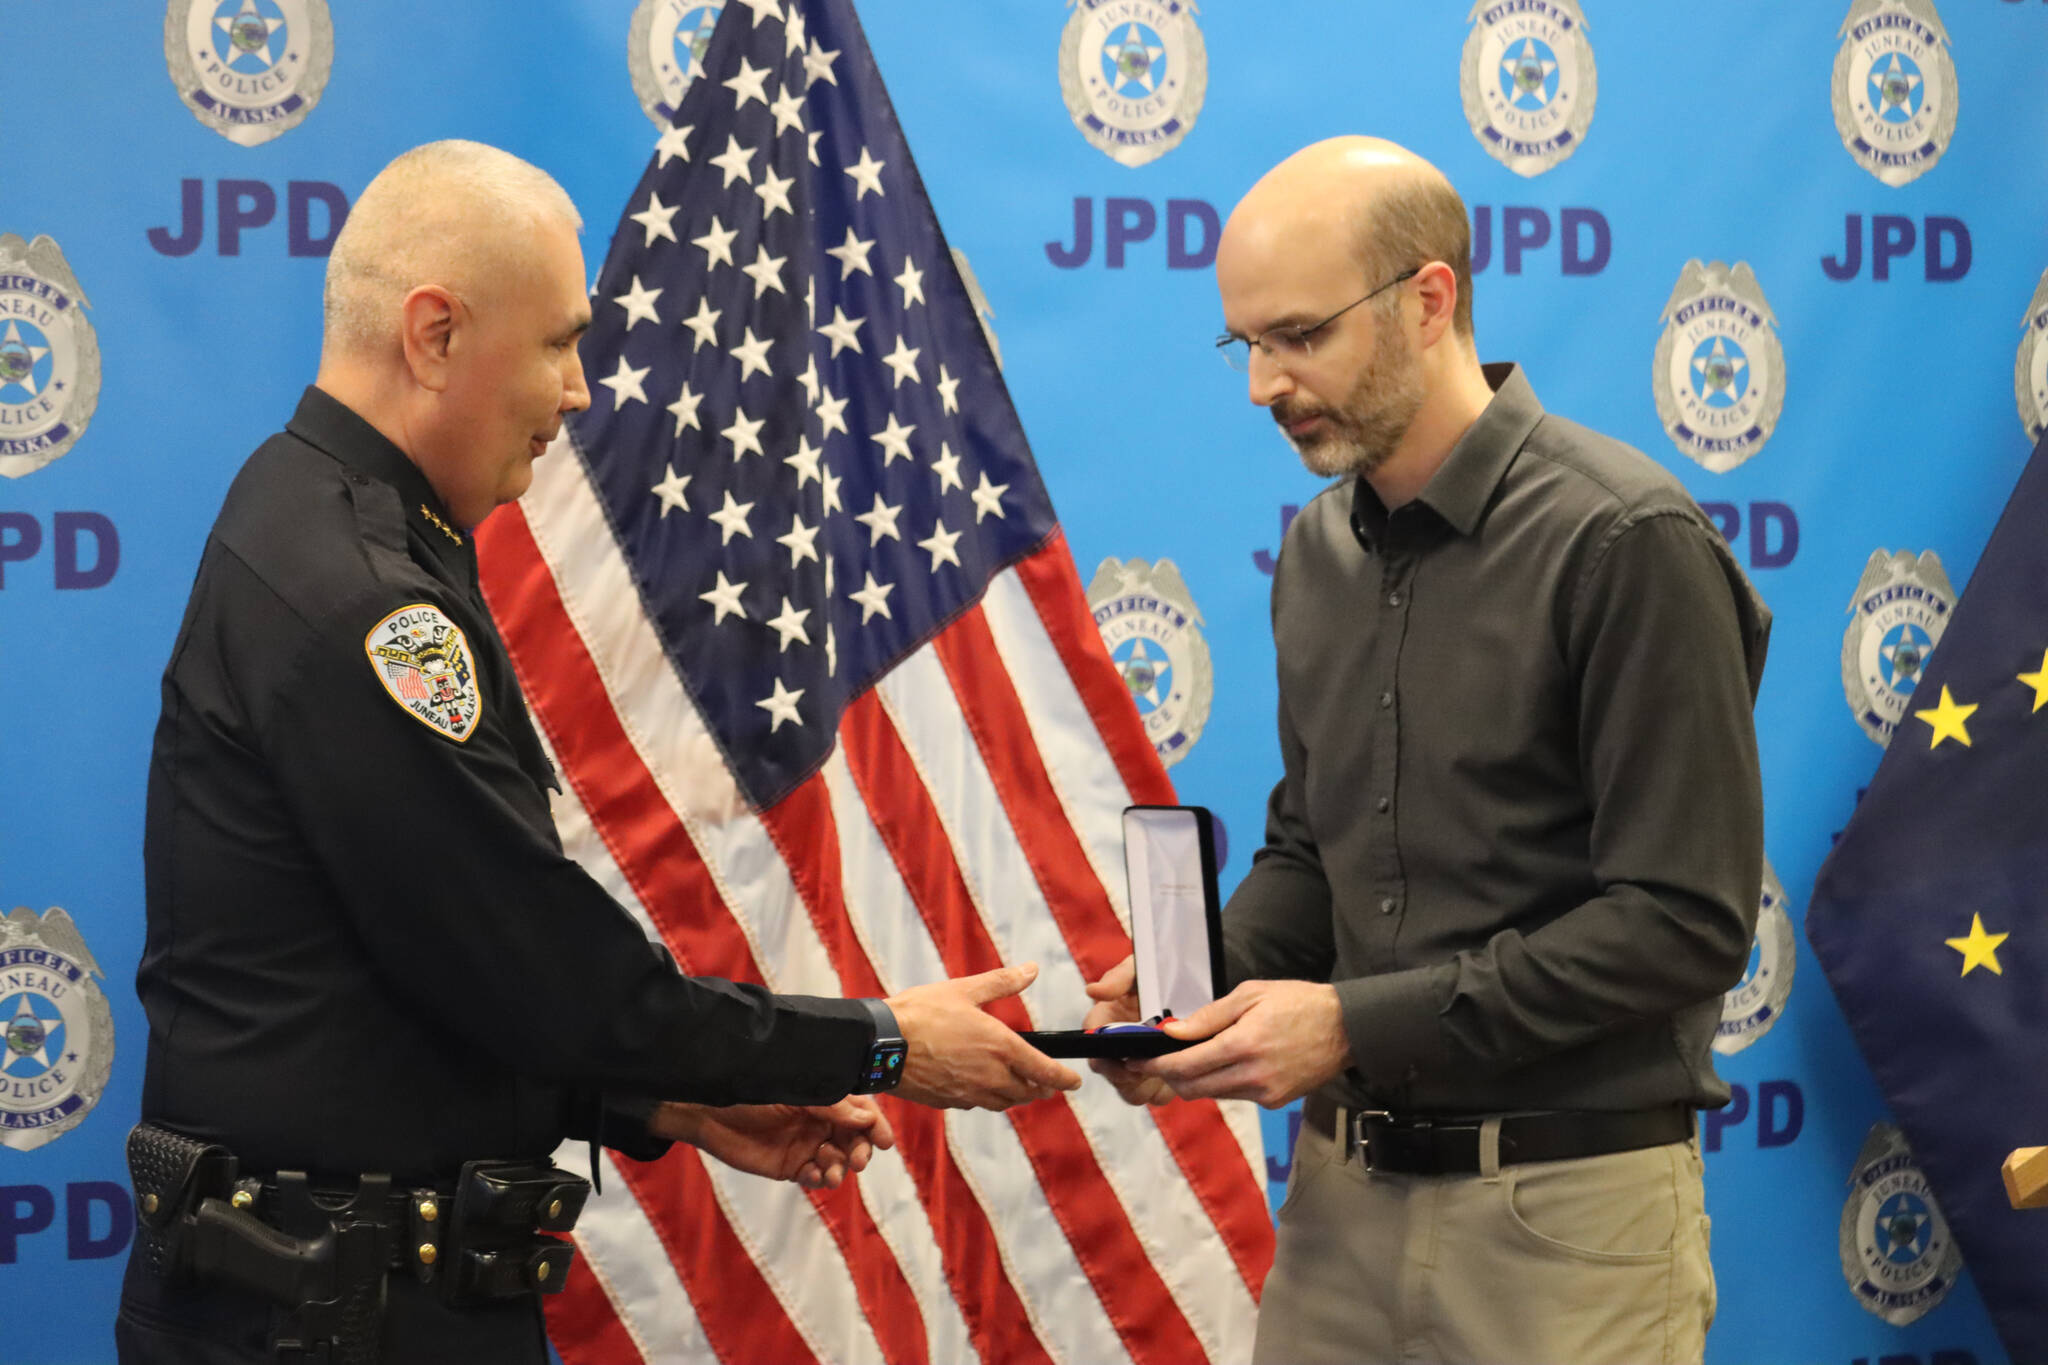 CBJ Deputy City Manager Robert Barr presents a Lifesaving Medal to JPD Chief Ed Mercer on Monday during the JPD’s annual award ceremony. Mercer was awarded for his assistance in rescuing passengers from the boat after running aground on Favorite Reef. (Jonson Kuhn / Juneau Empire)